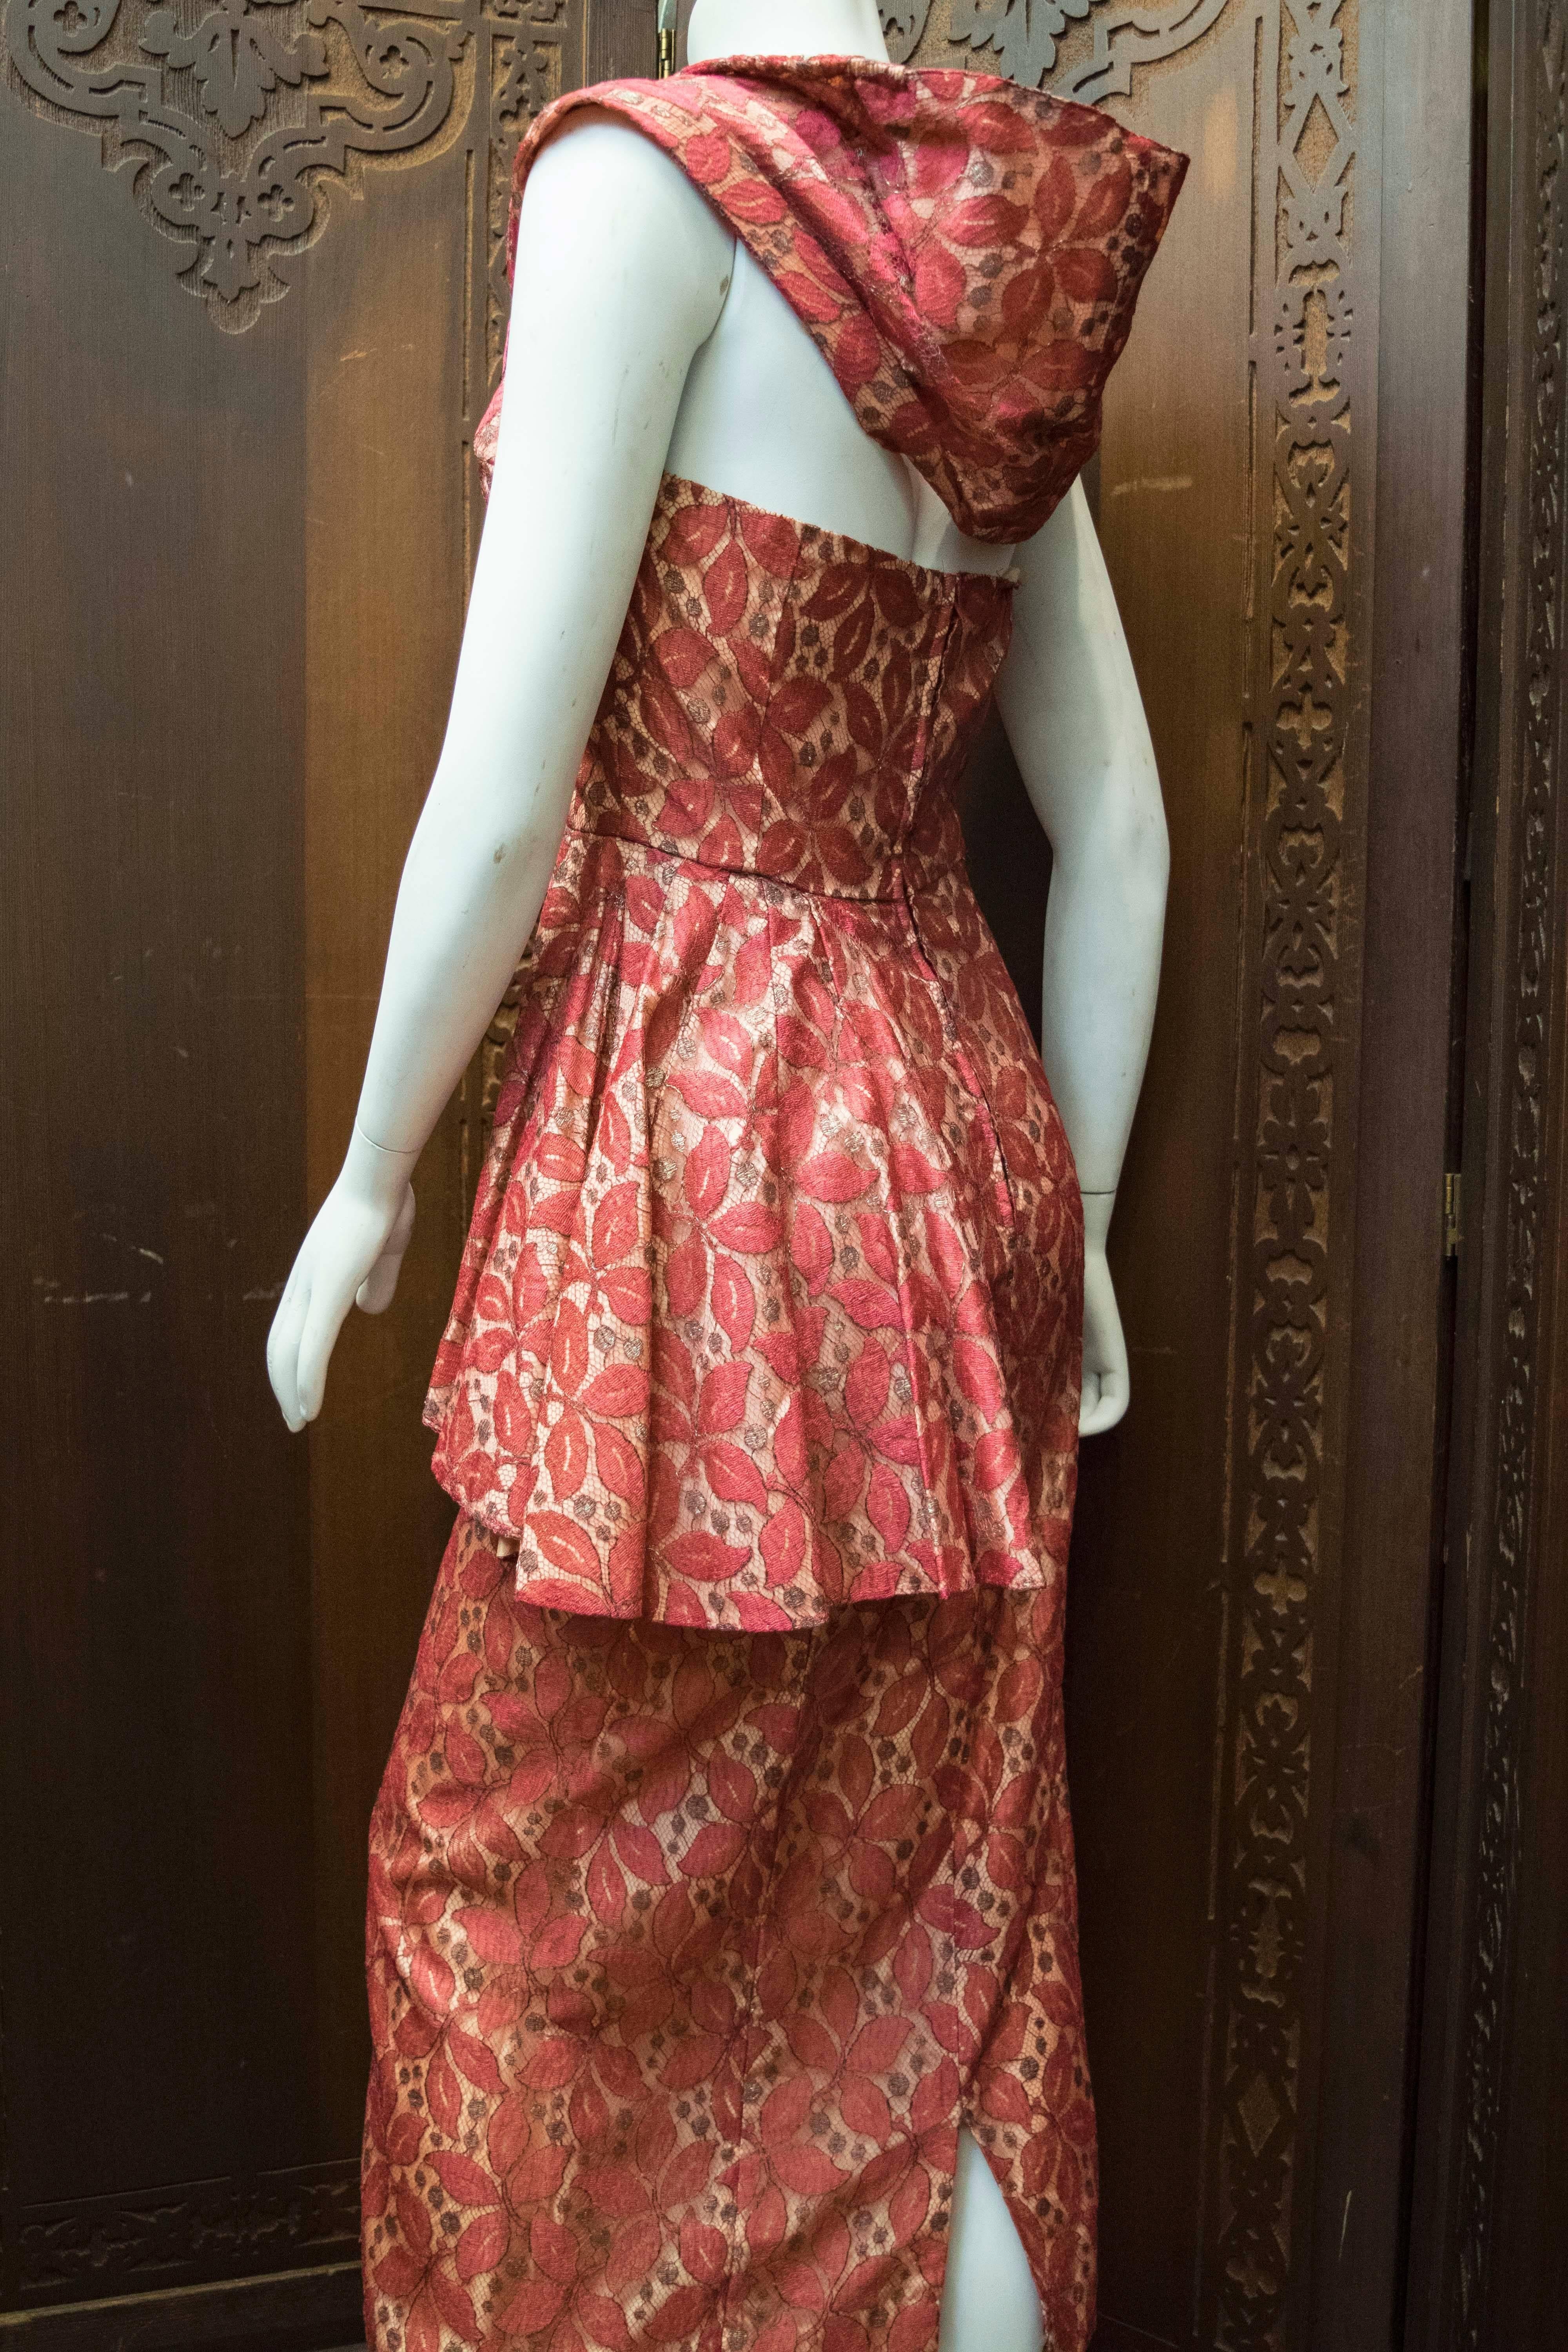 Women's 1950s Red Lace Cocktail Dress